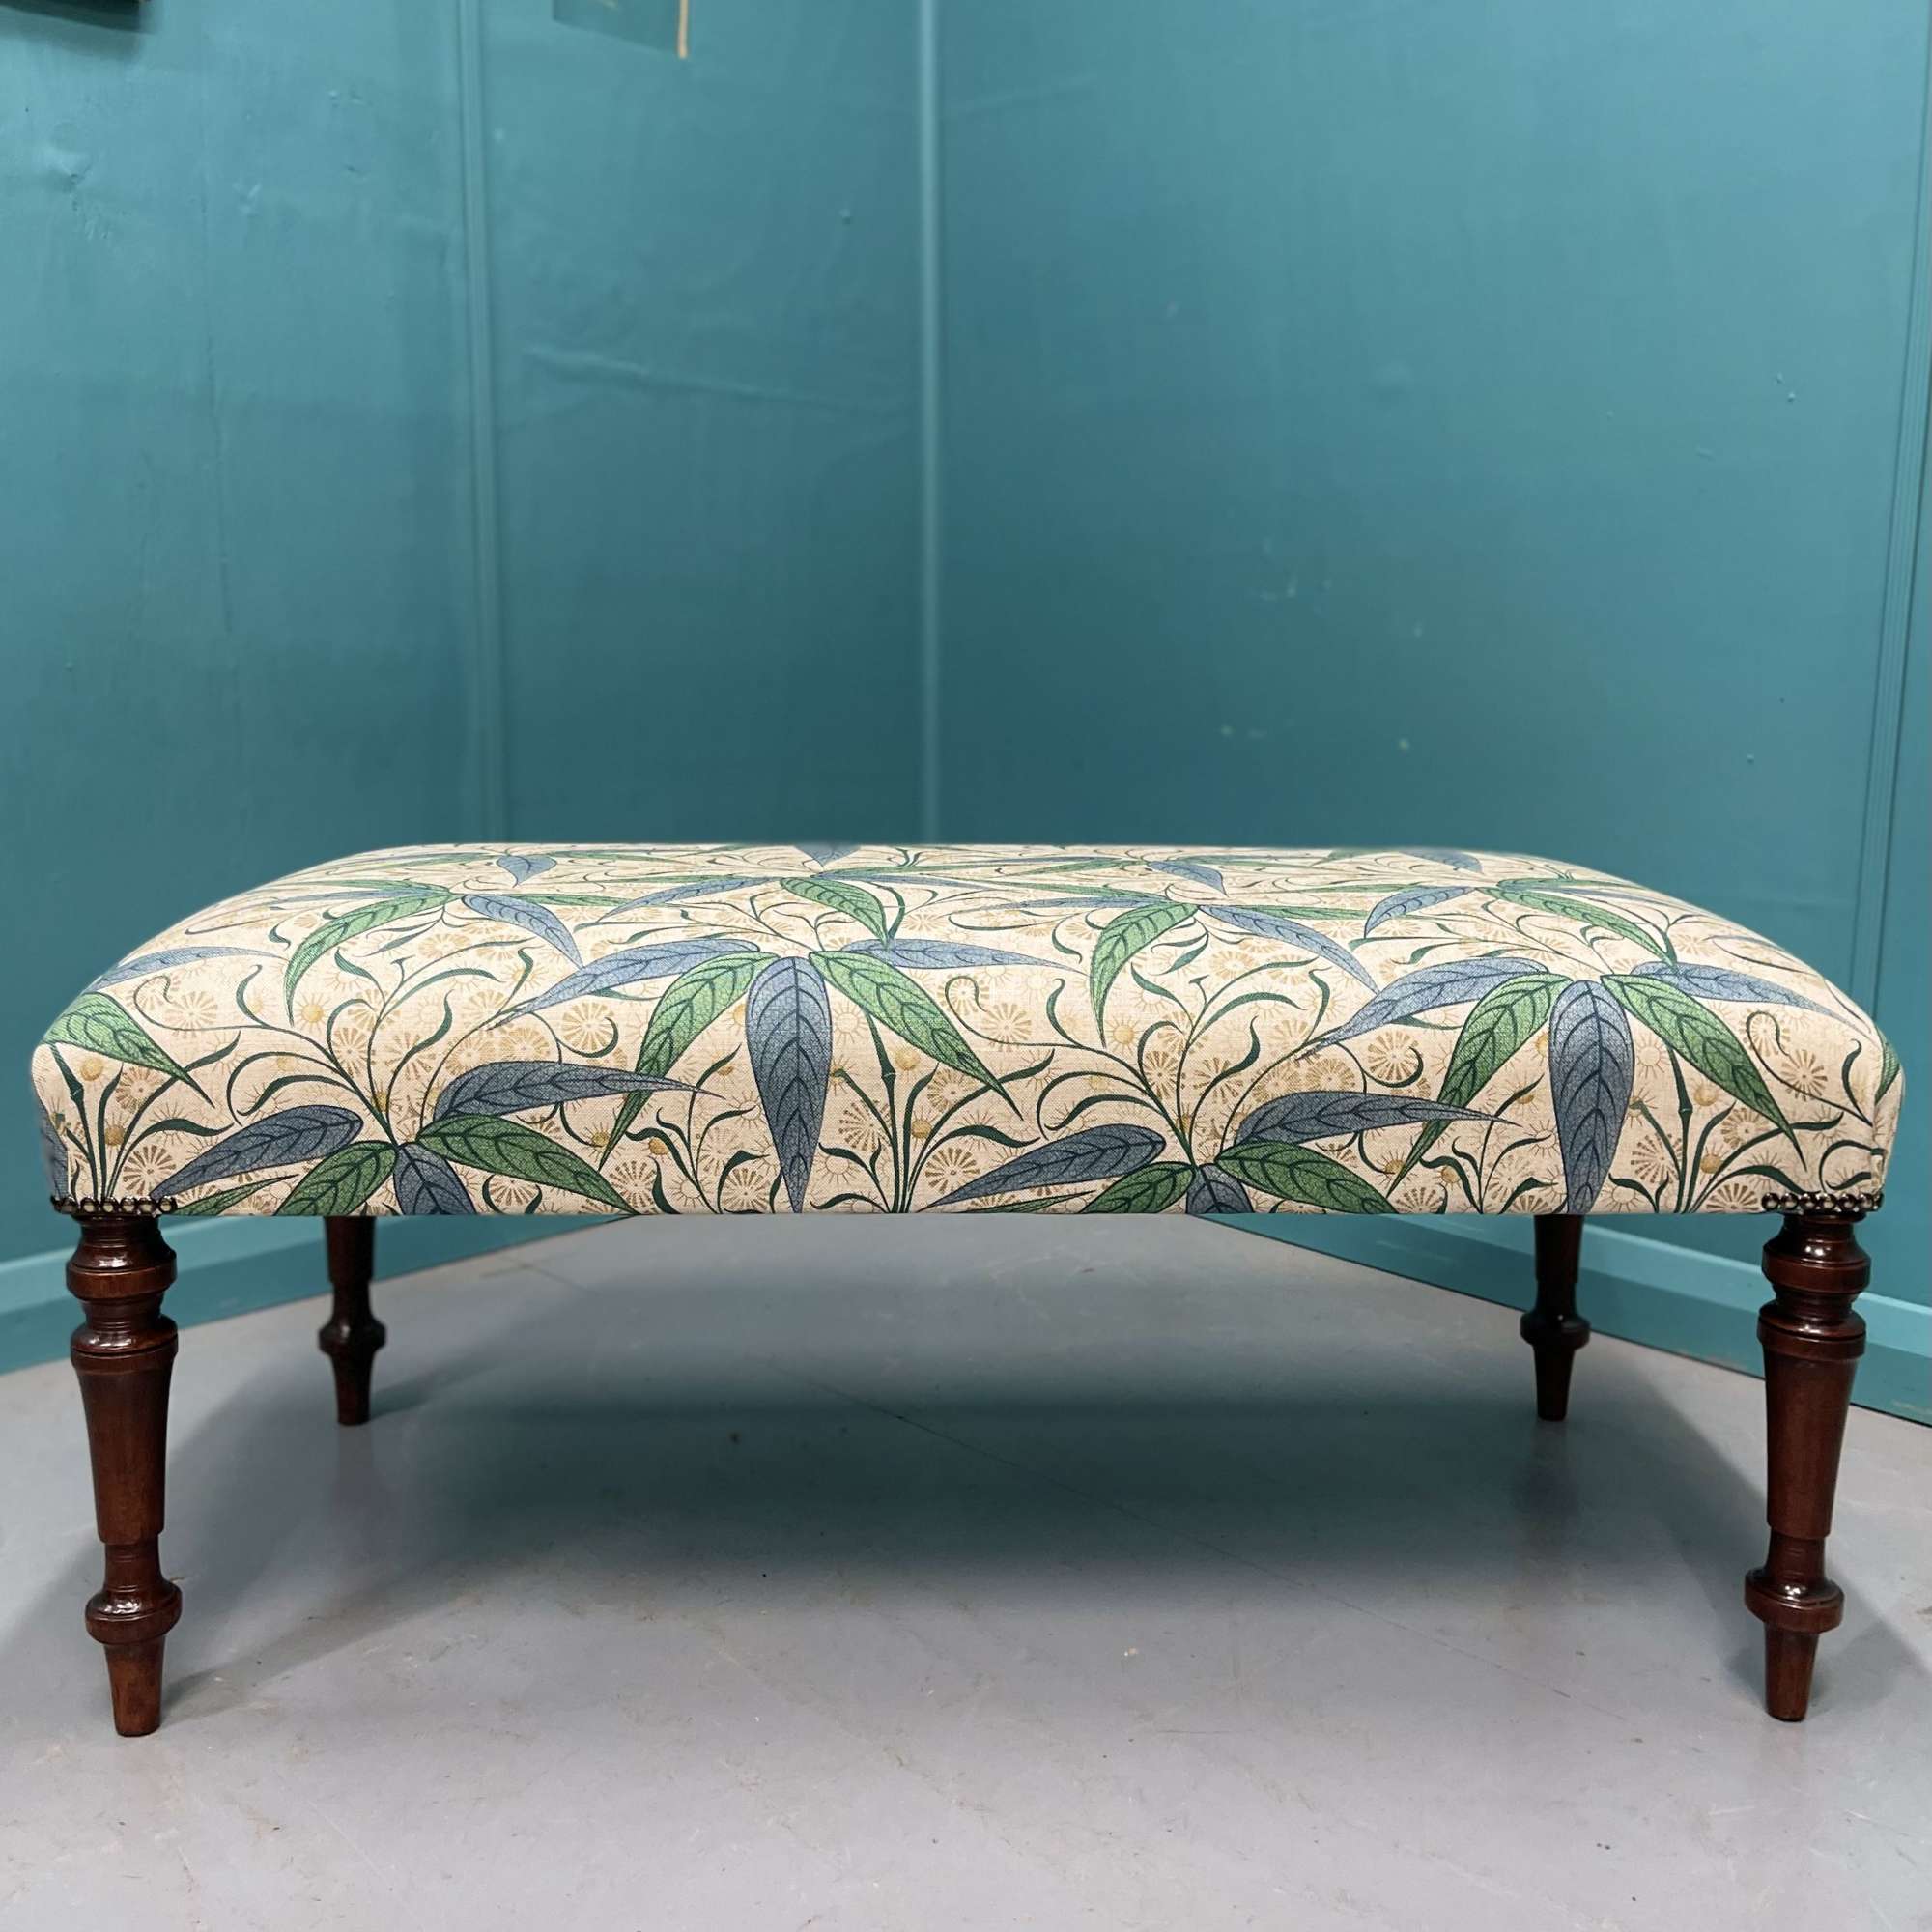 Newly Upholstered Leaf Motif Ottoman Footstool